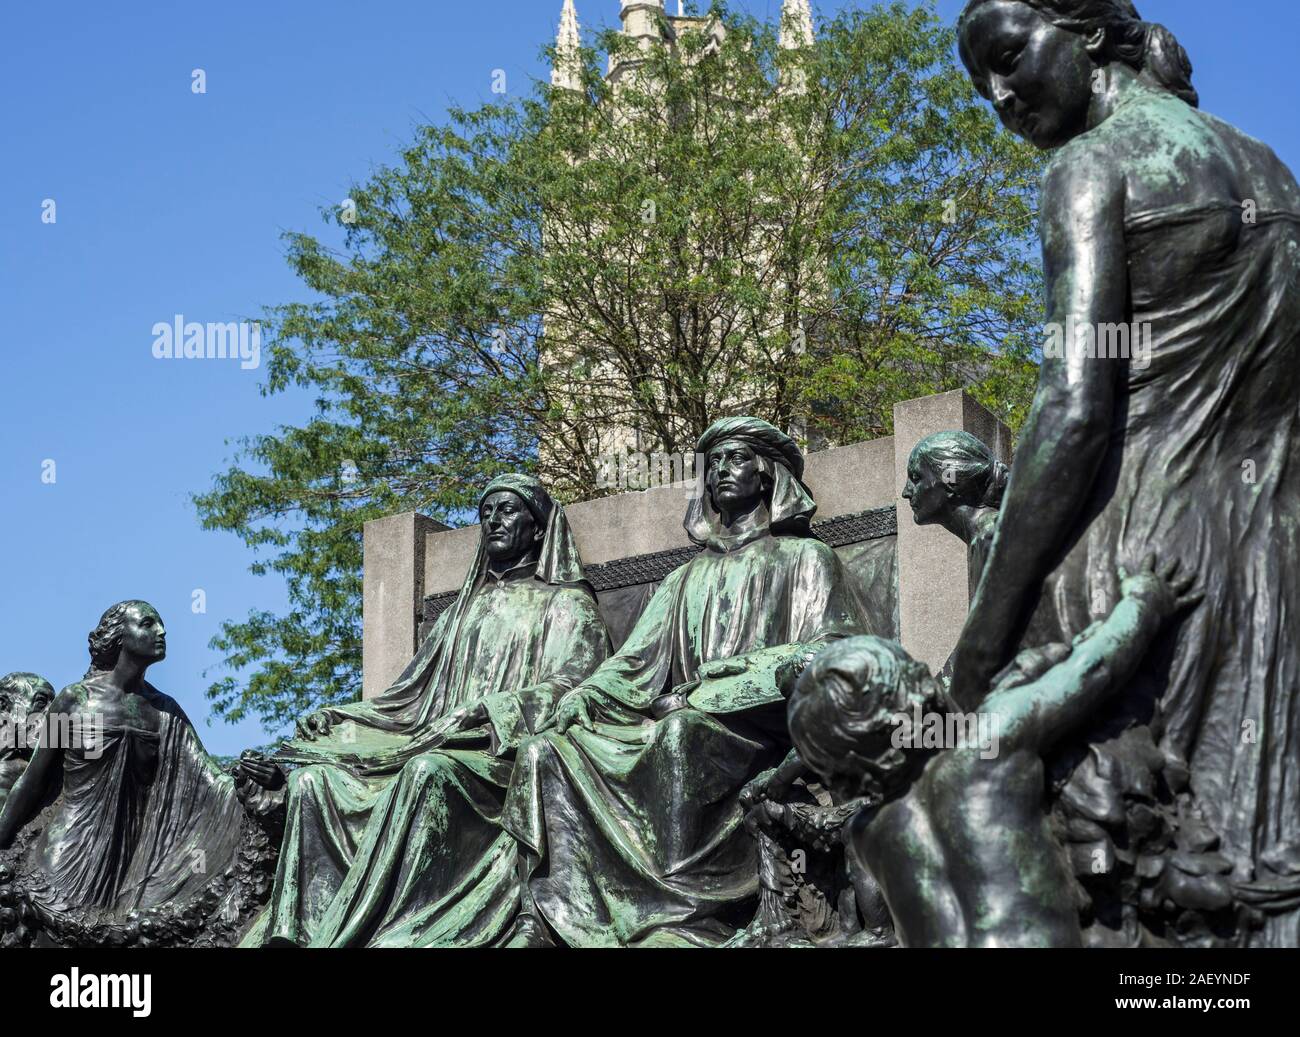 Monument in honour of the Van Eyck brothers, Jan and Hubert, painters of the Ghent Altarpiece / Adoration of the Mystic Lamb, Ghent, Flanders, Belgium Stock Photo